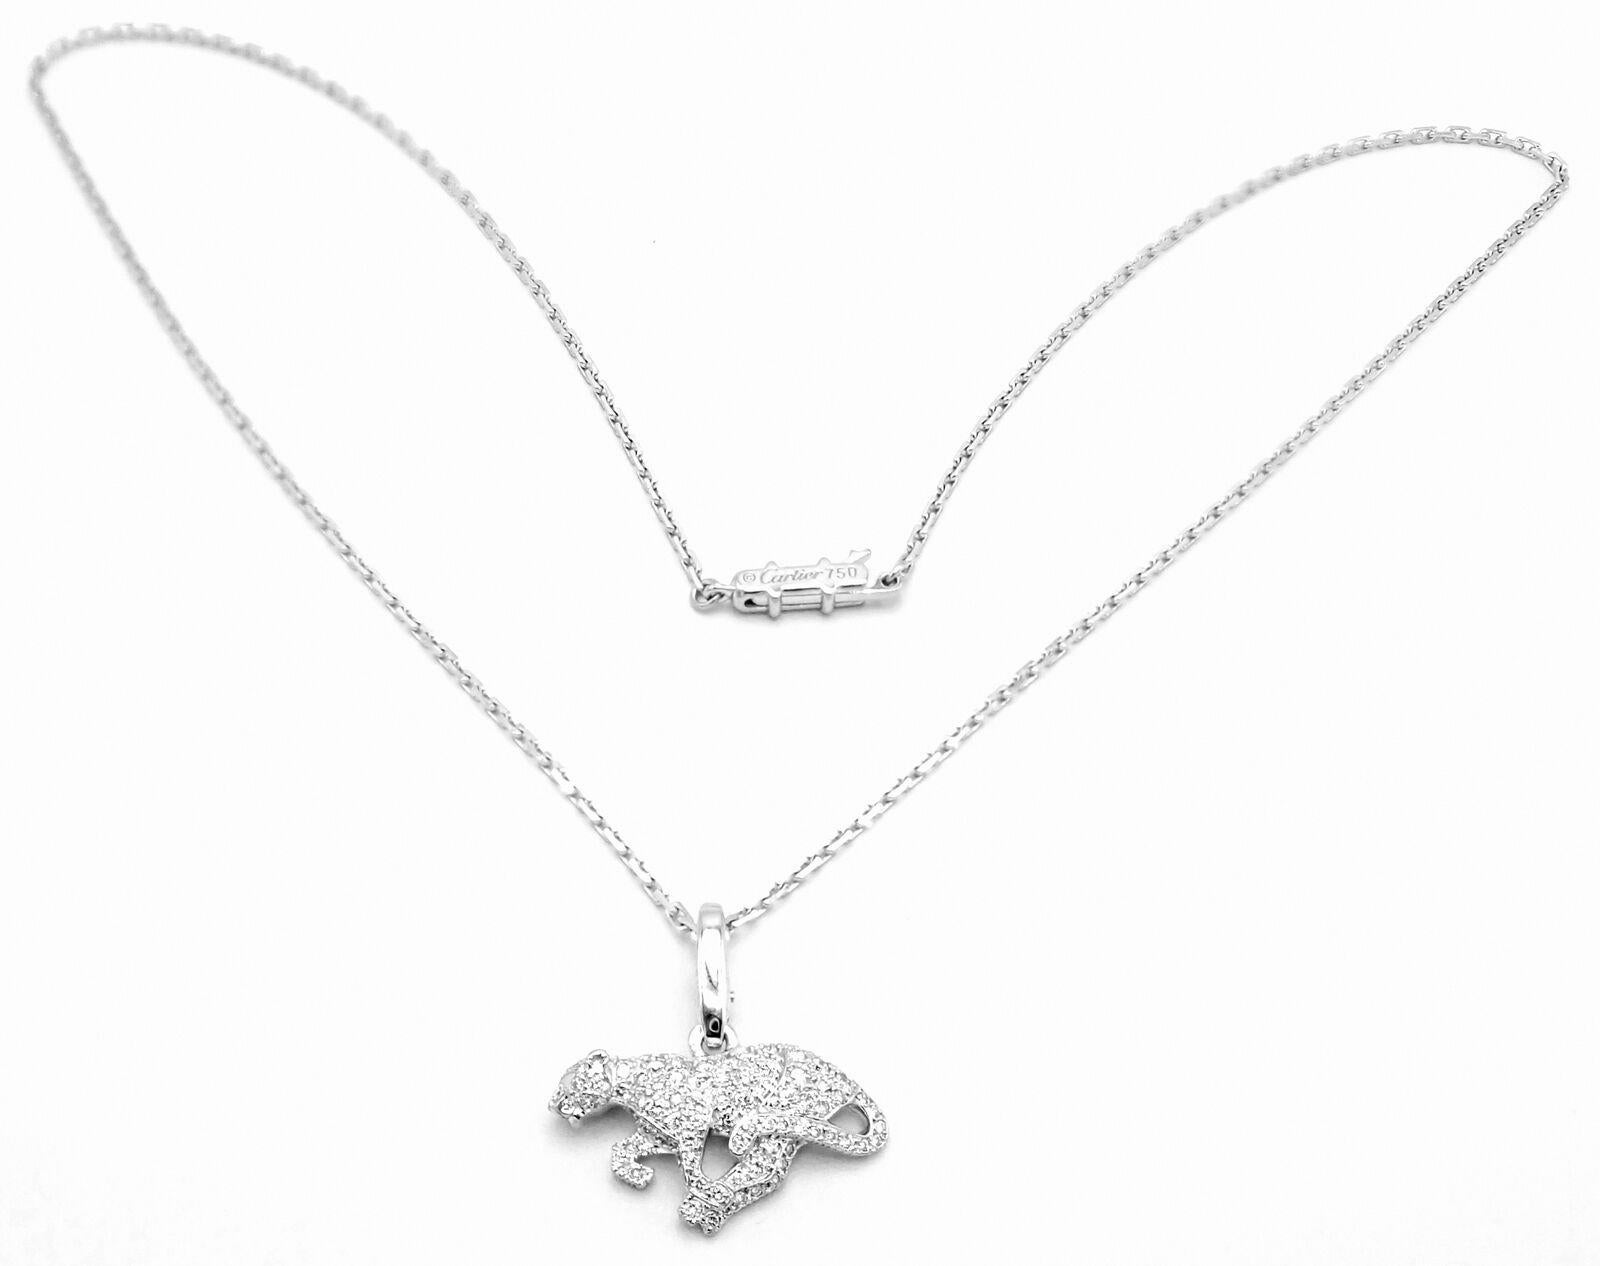 18k White Gold Panther Diamond Pendant Necklace by Cartier. 
Part of the Panthere Collection. 
With Round brilliant cut diamonds VVS1 clarity, E color total weight approx. .50ct
Details: 
Weight: 9.9 grams
Length: 16.5